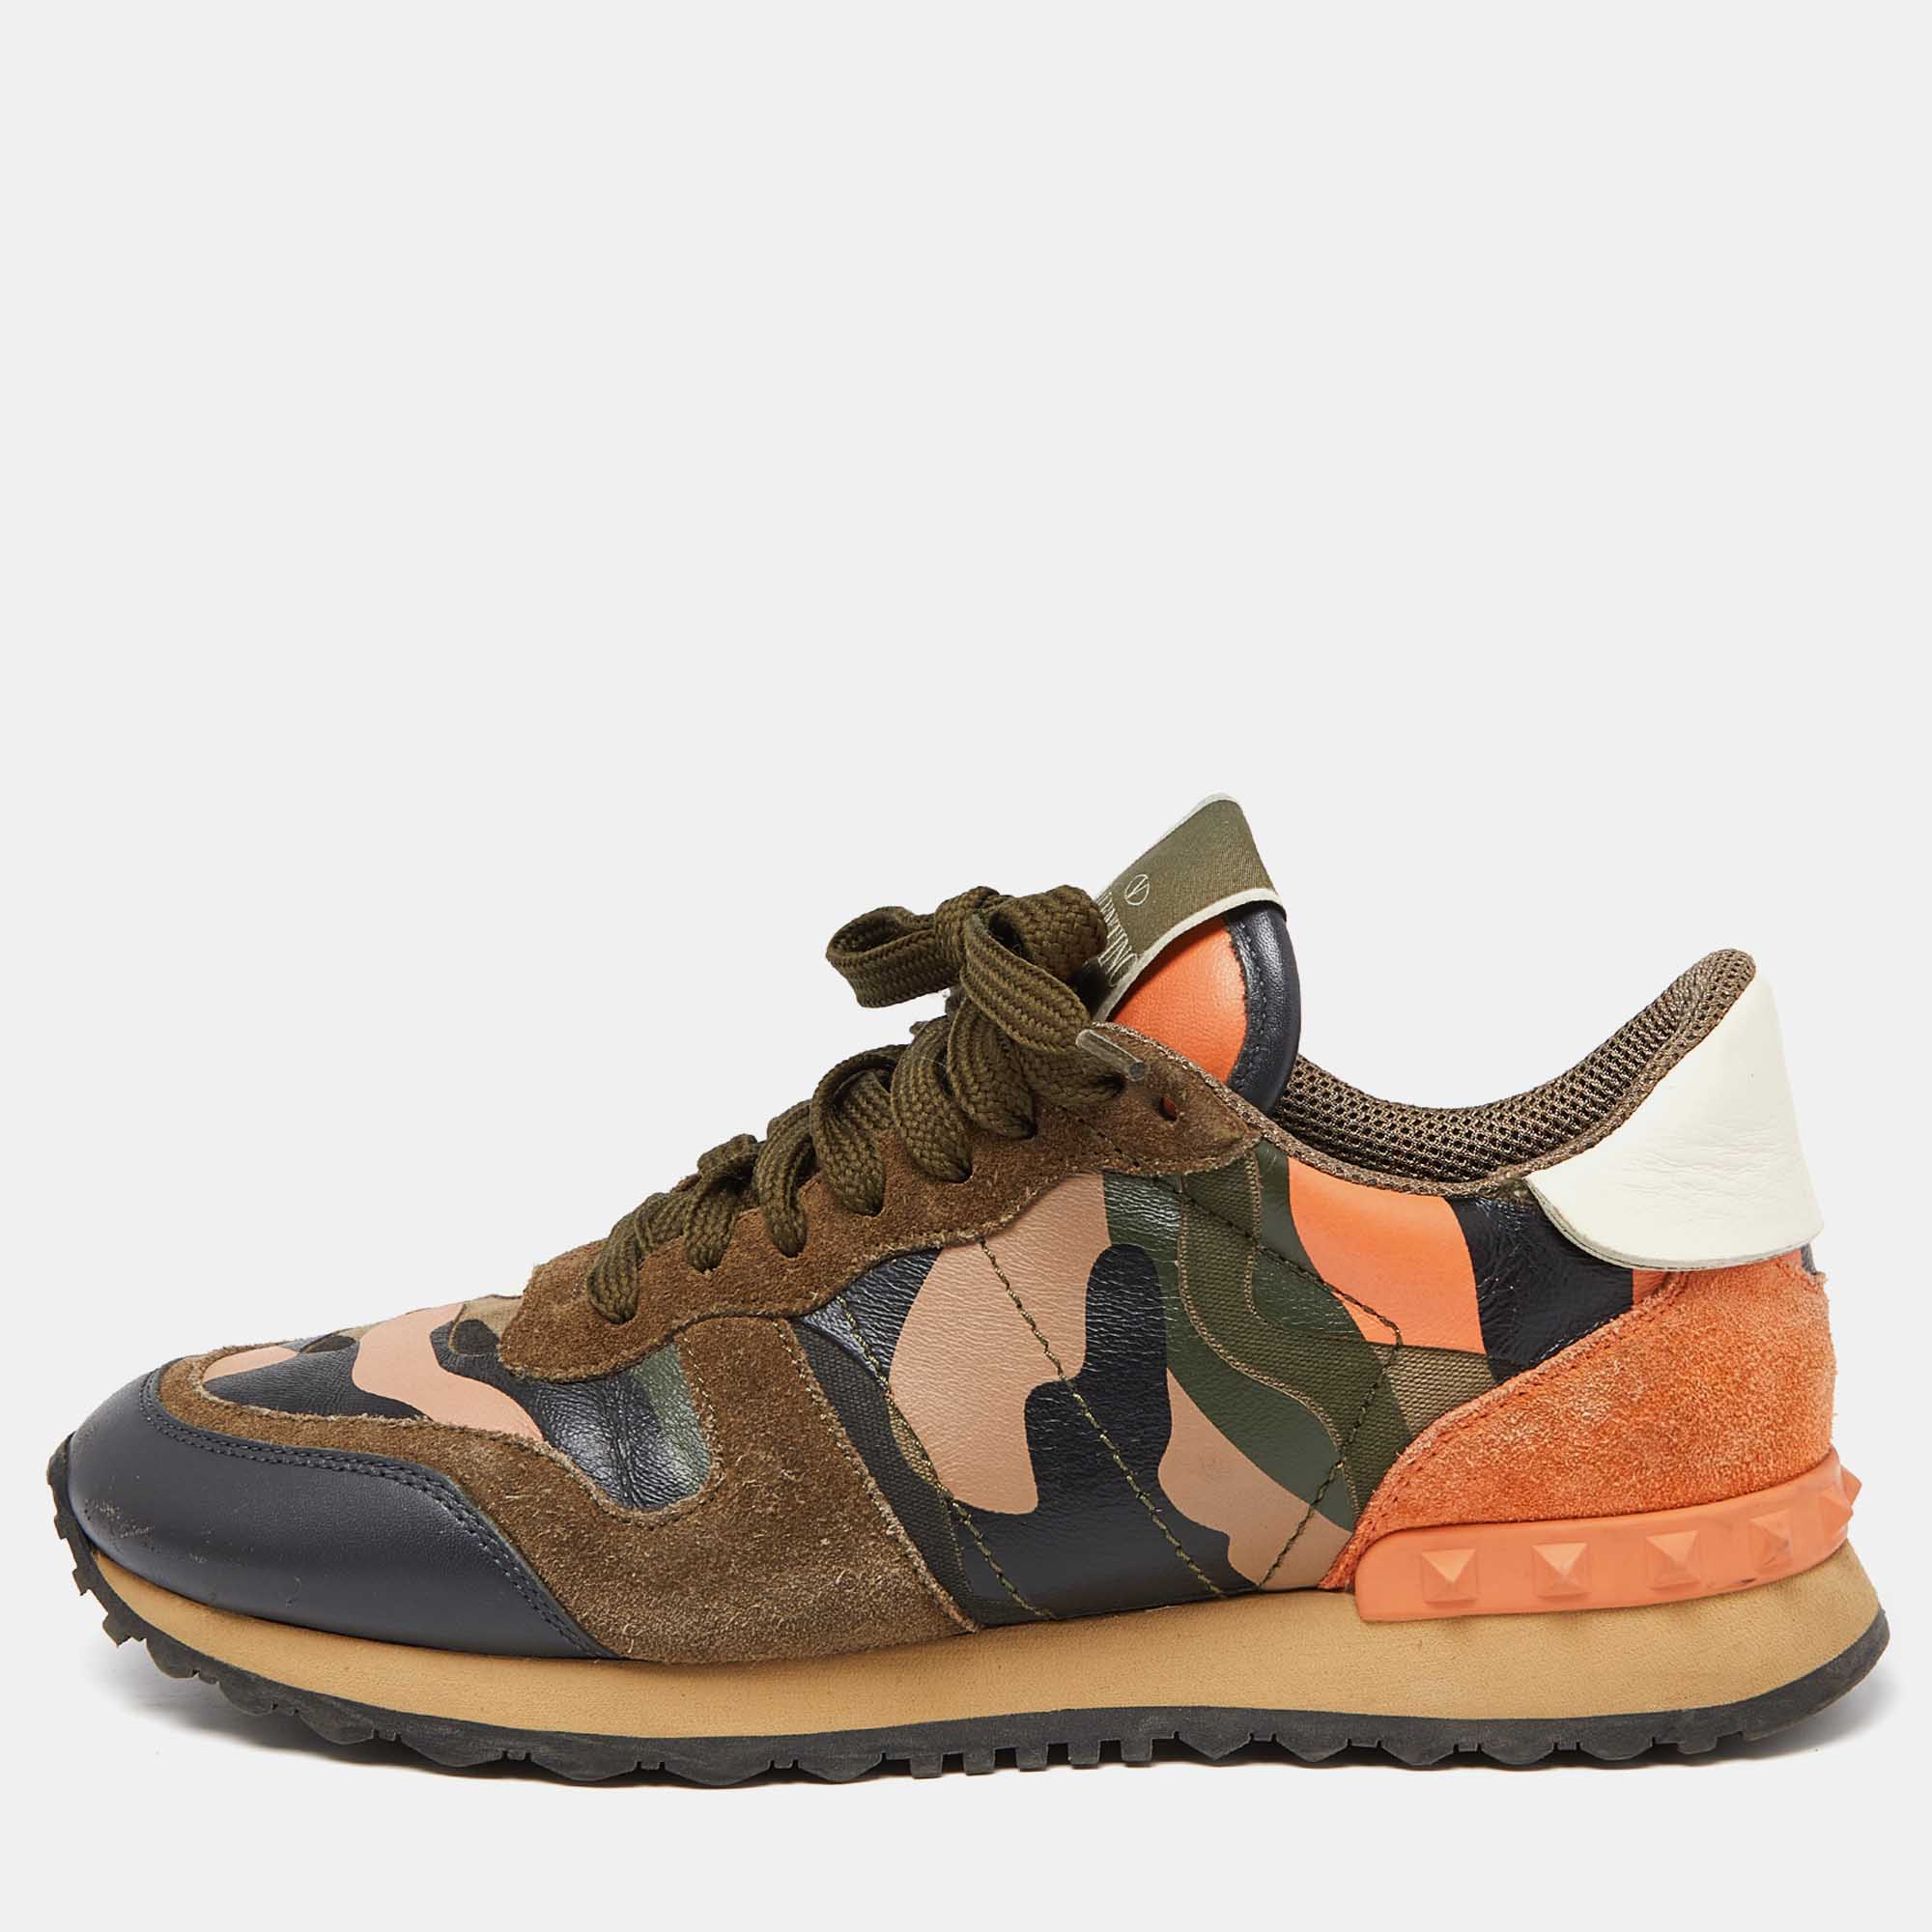 Pre-owned Valentino Garavani Multicolor Camo Print Canvas And Leather Rockrunner Sneakers Size 37.5 In Green